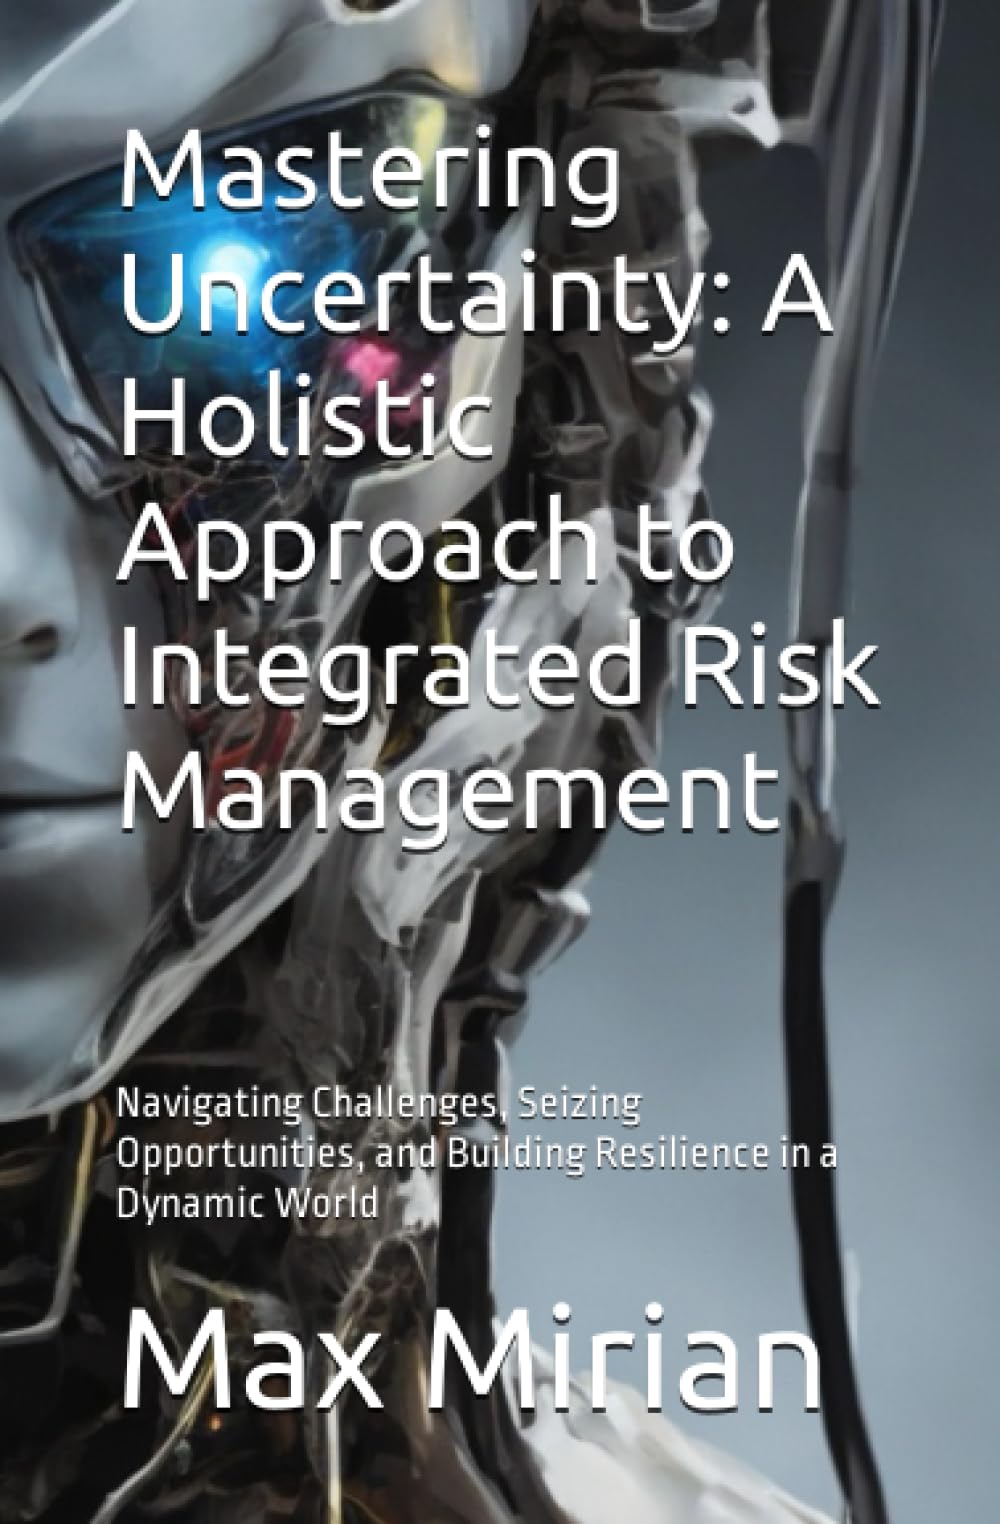 Mastering Uncertainty: A Holistic Approach to Integrated Risk Management: Navigating Challenges, Seizing Opportunities, and Building Resilience in a Dynamic World